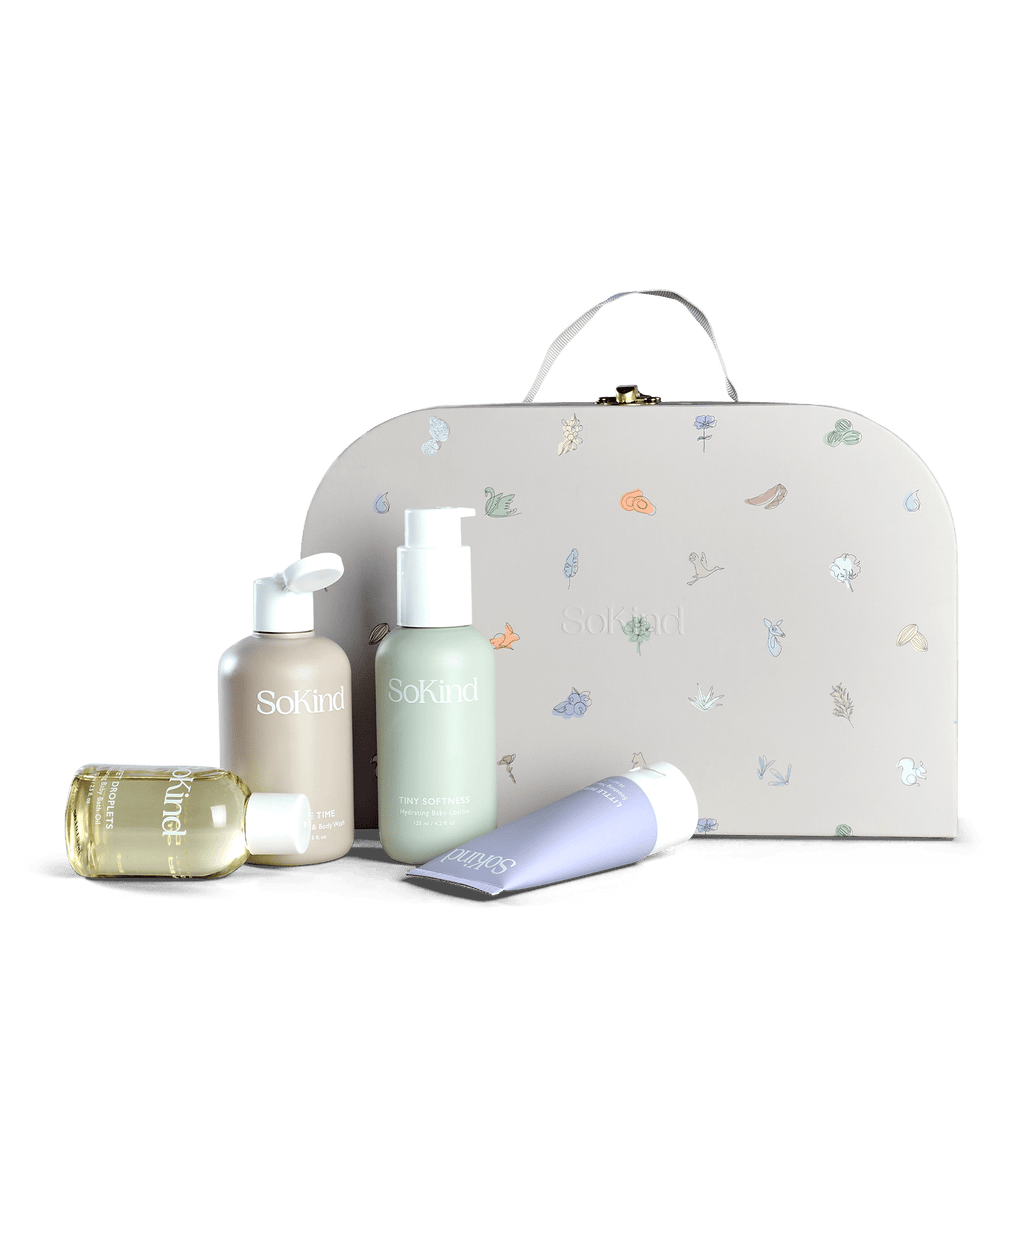 SO KIND - Dear Baby Skin Care Kit - The Natural Beauty Club